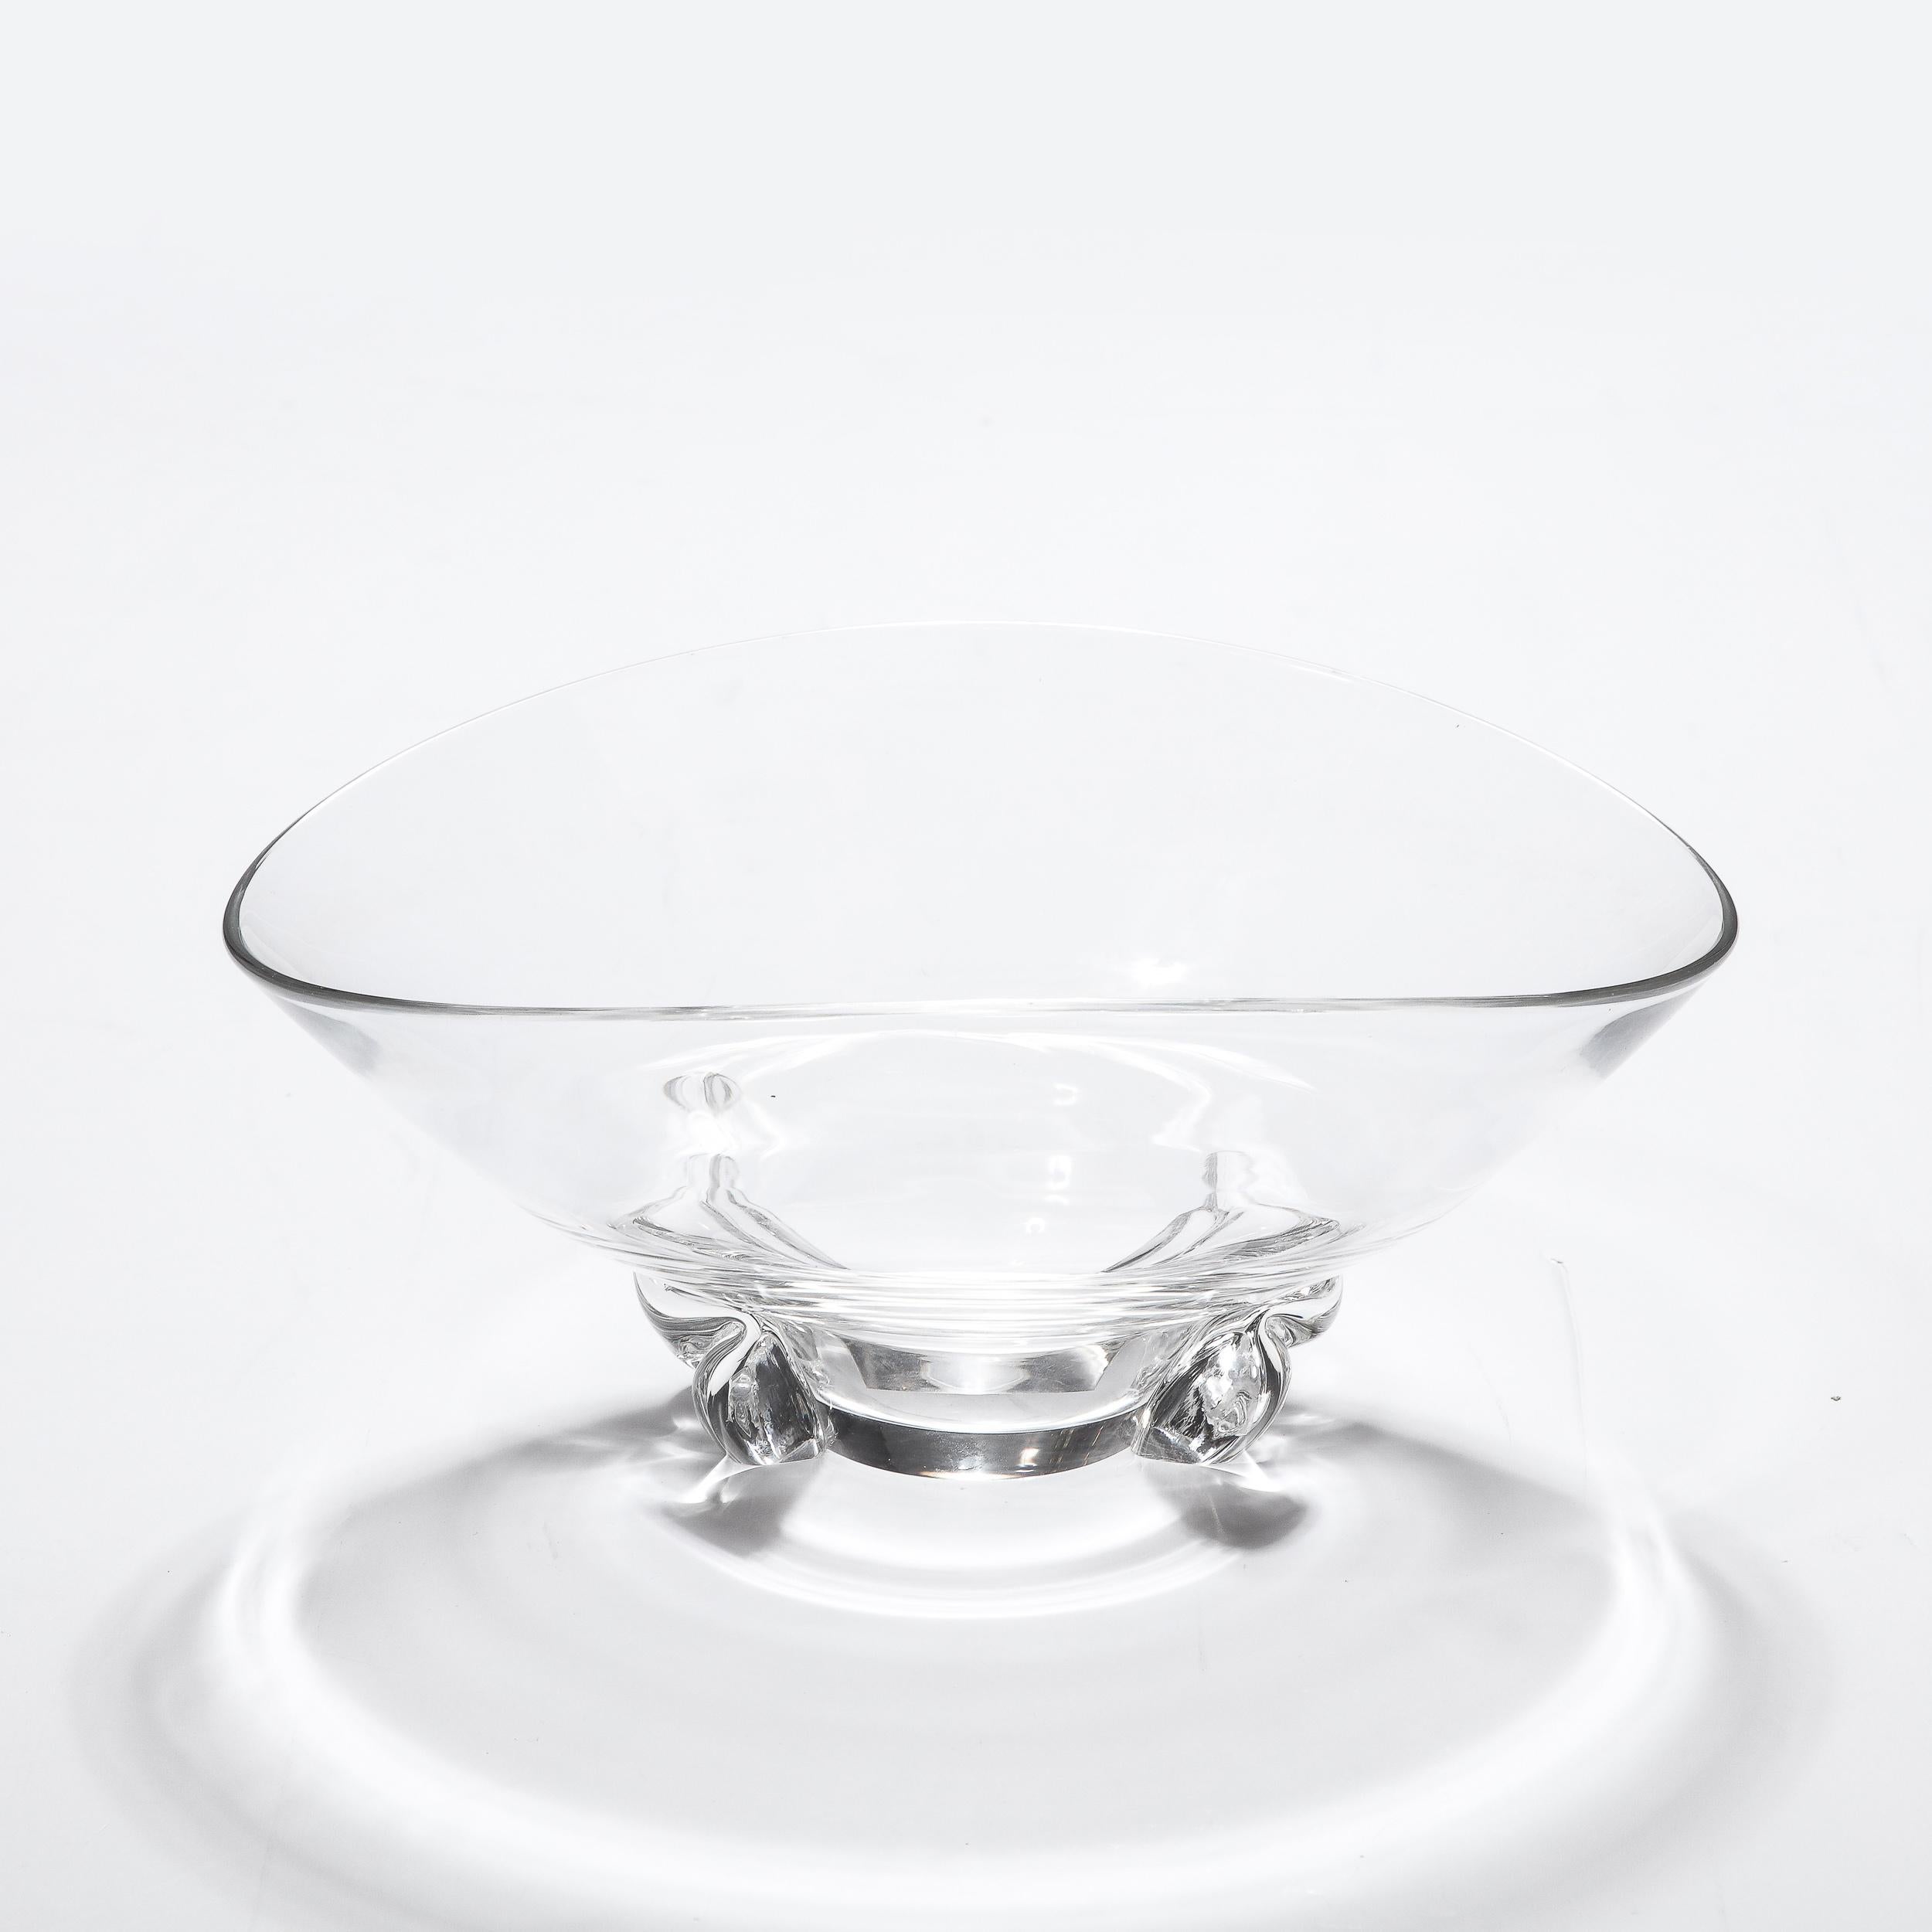 This Mid-Century Modernist Bowl in Hand-Blown Glass and Organic Sculptural Base is signed Steuben and originates from the United States, Circa 1960. This piece features a beautiful sculptural base which appears to undulate and fold into itself with